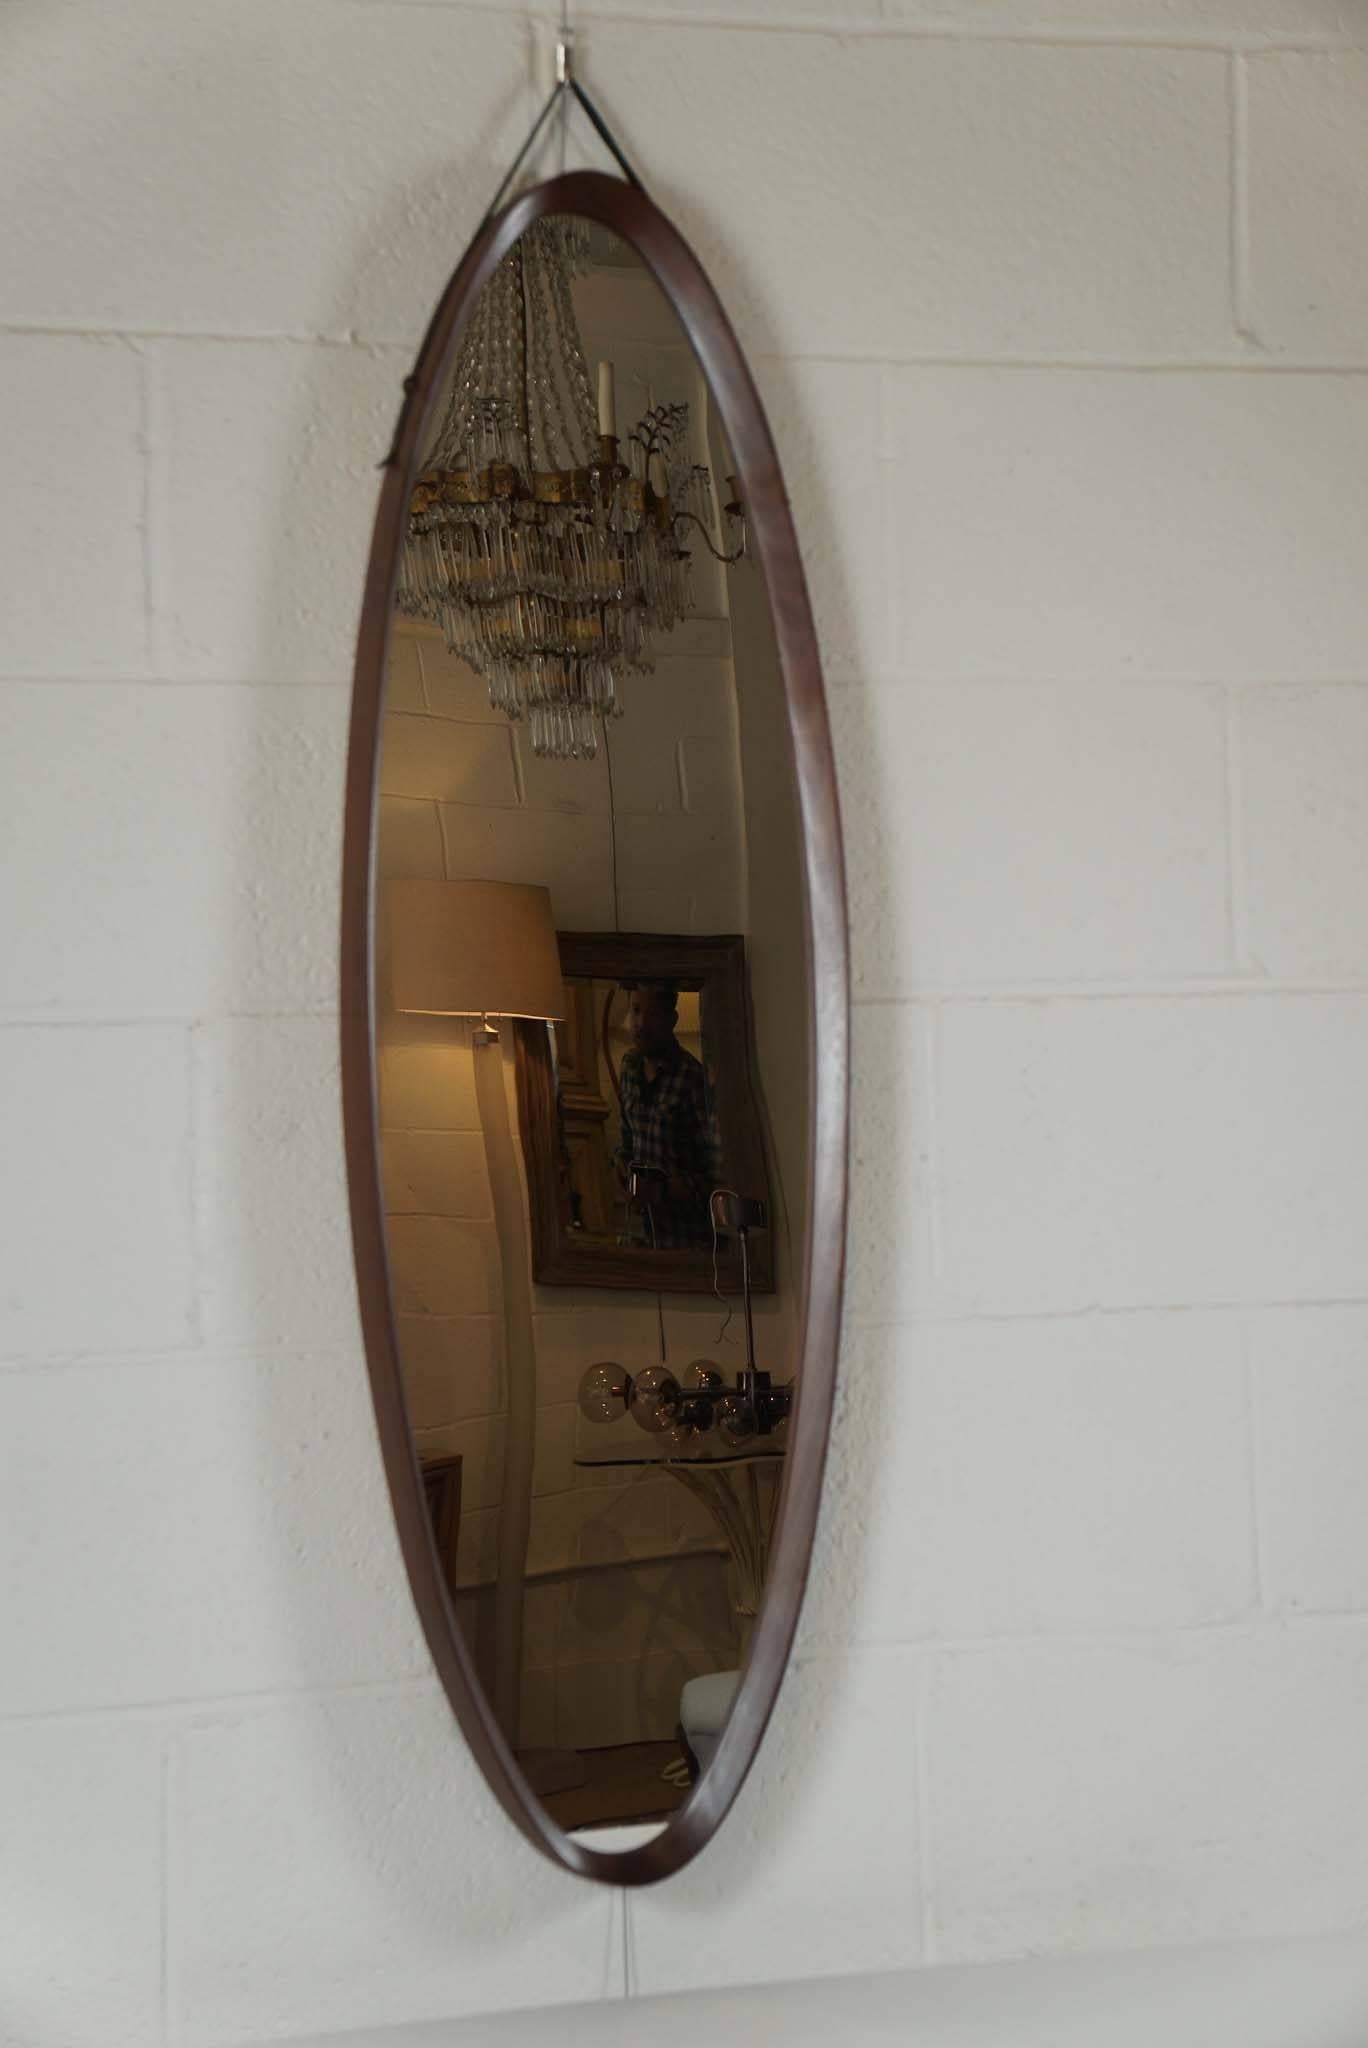 Here is a narrow oval mirror with an inset frame in walnut.
The mirror has a vintage leather strap for hanging.